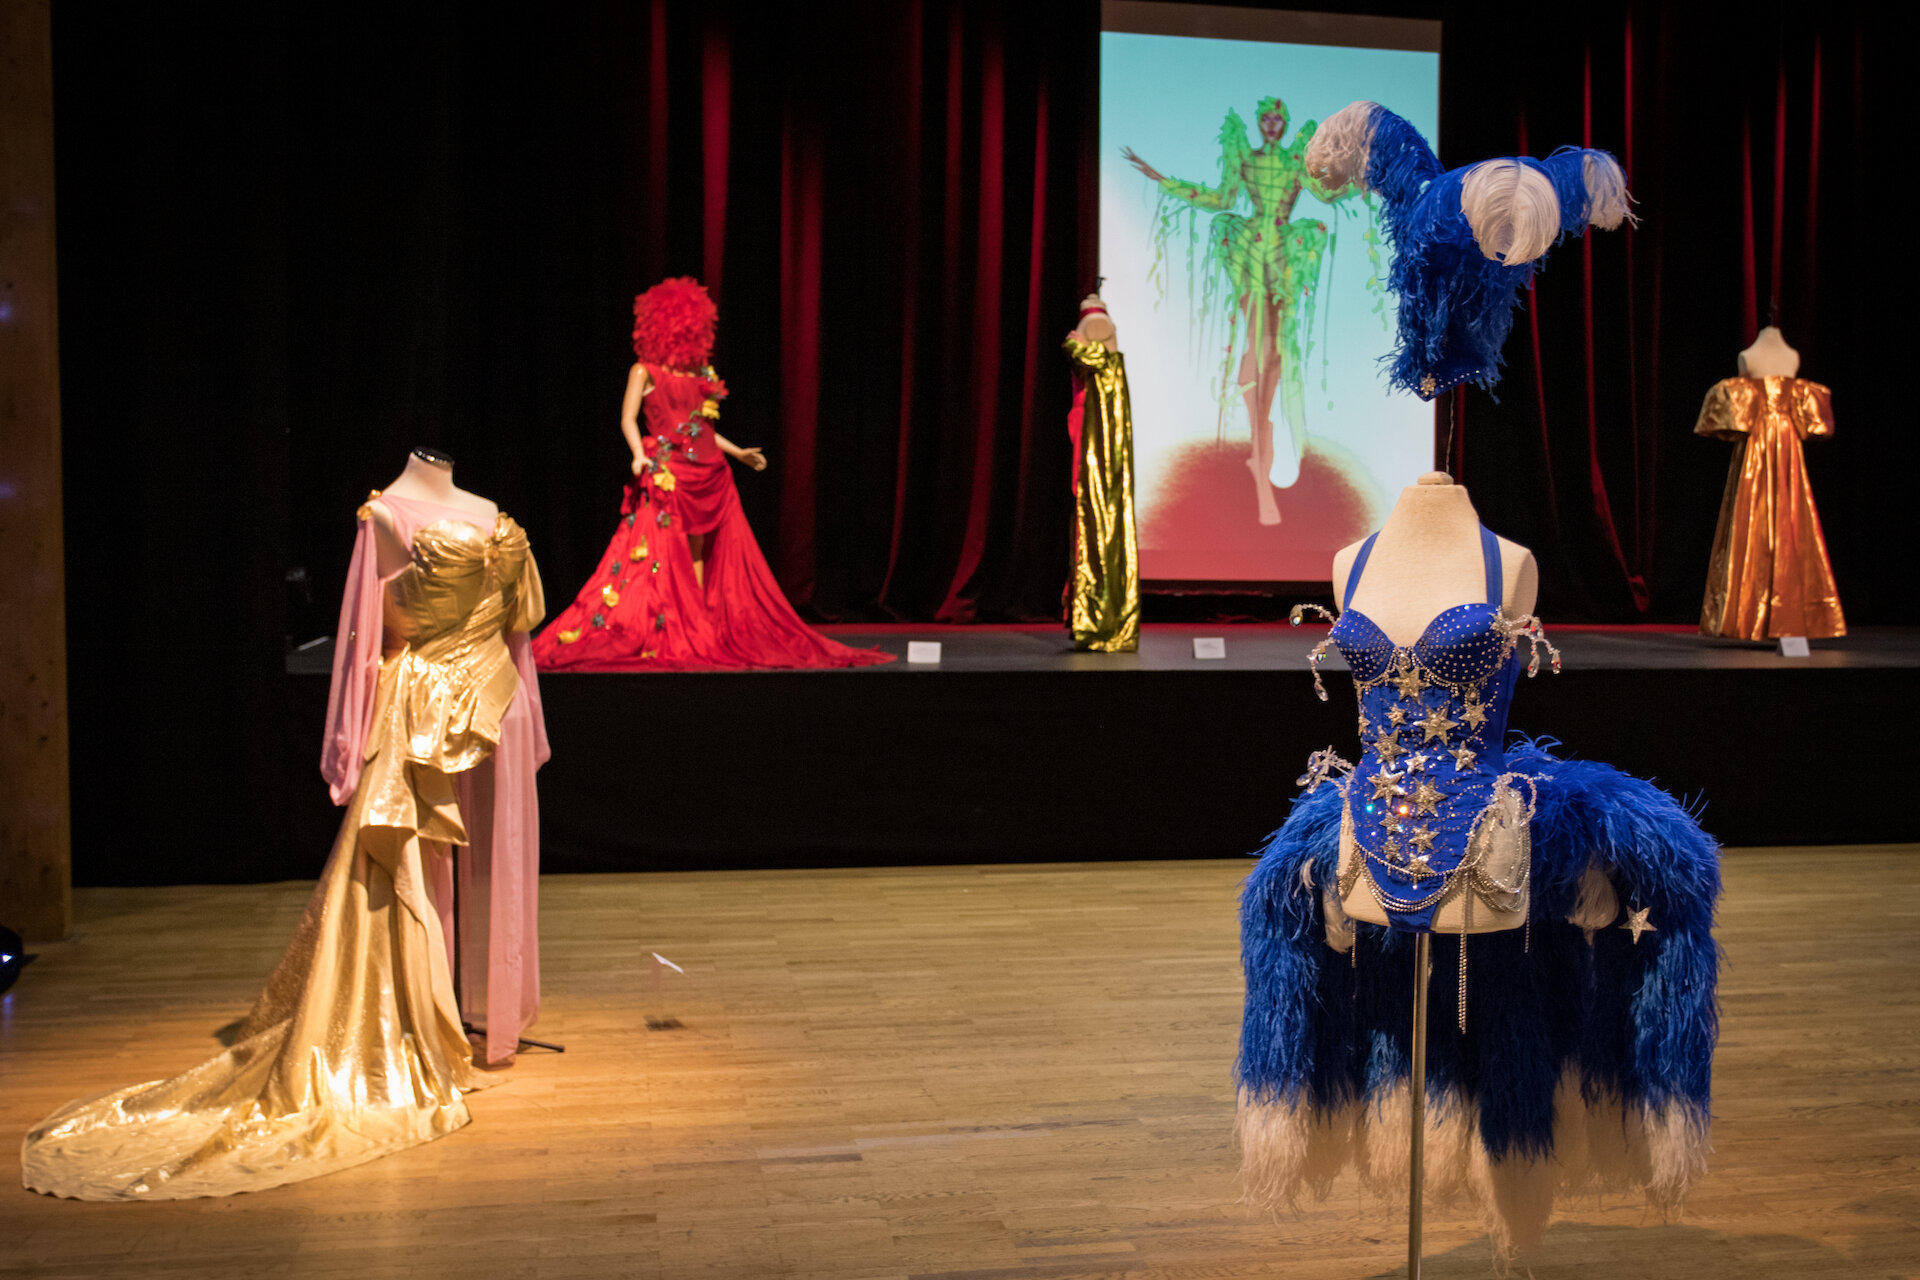 The exhibition, showing at Mareel throughout July, consists of a dazzling array of drag outfits. Photo: Chloe Garrick.